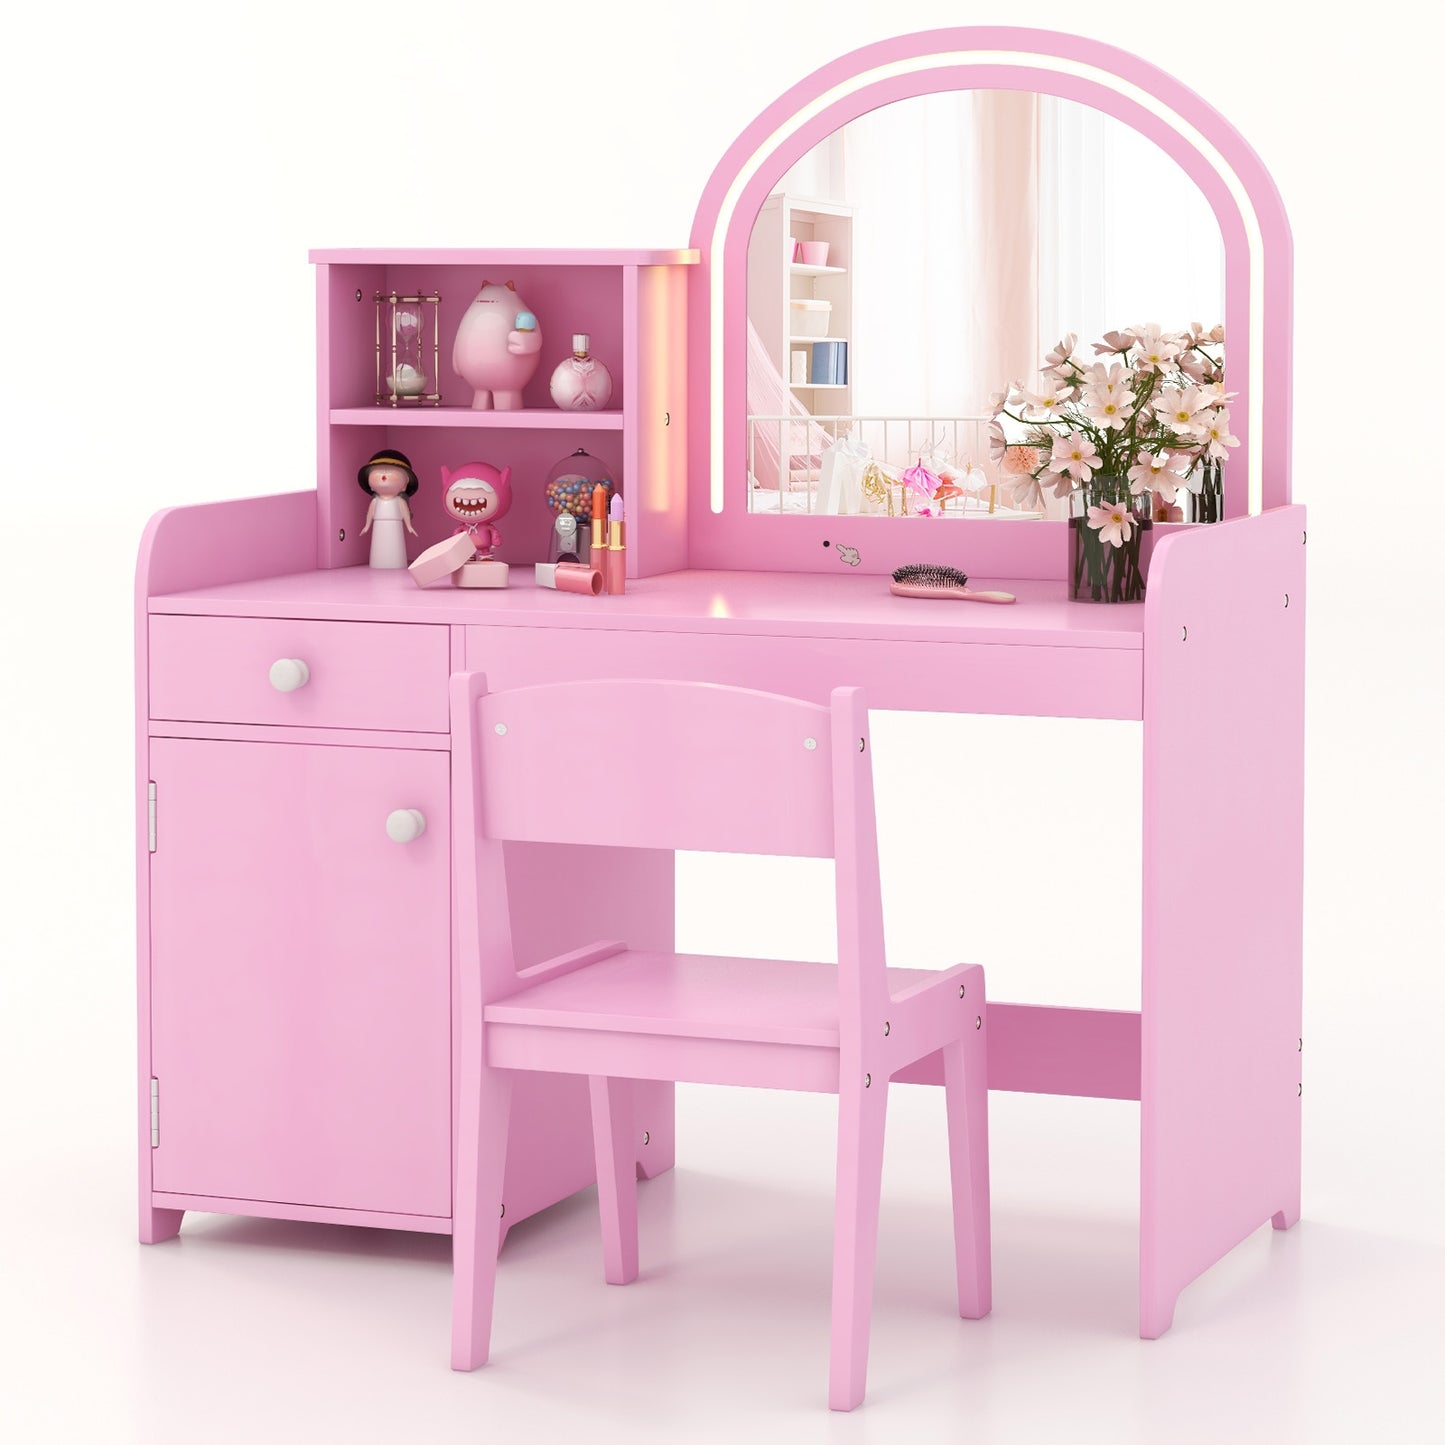 Kids Vanity Table and Chair Set with Shelves Drawer and Cabinet-Pink